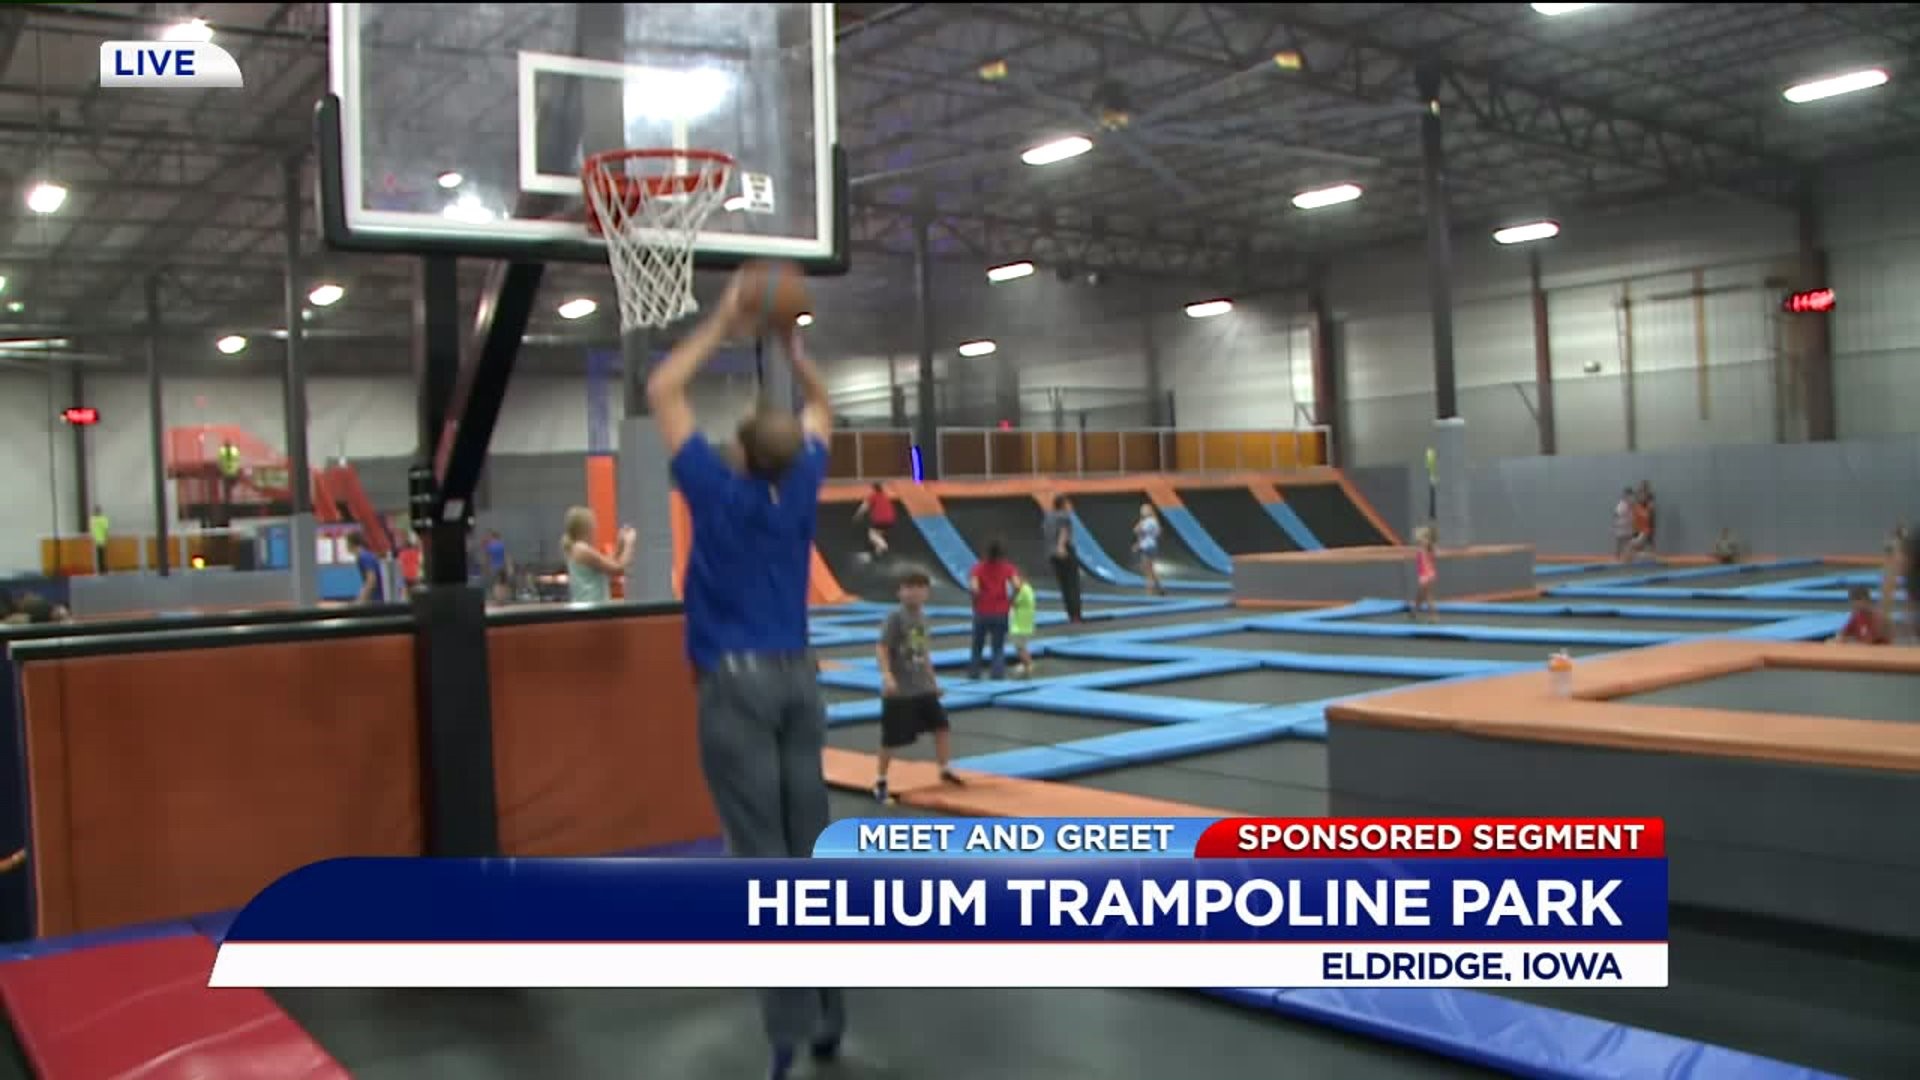 Jonathan shows off moves at Helium Trampoline Park